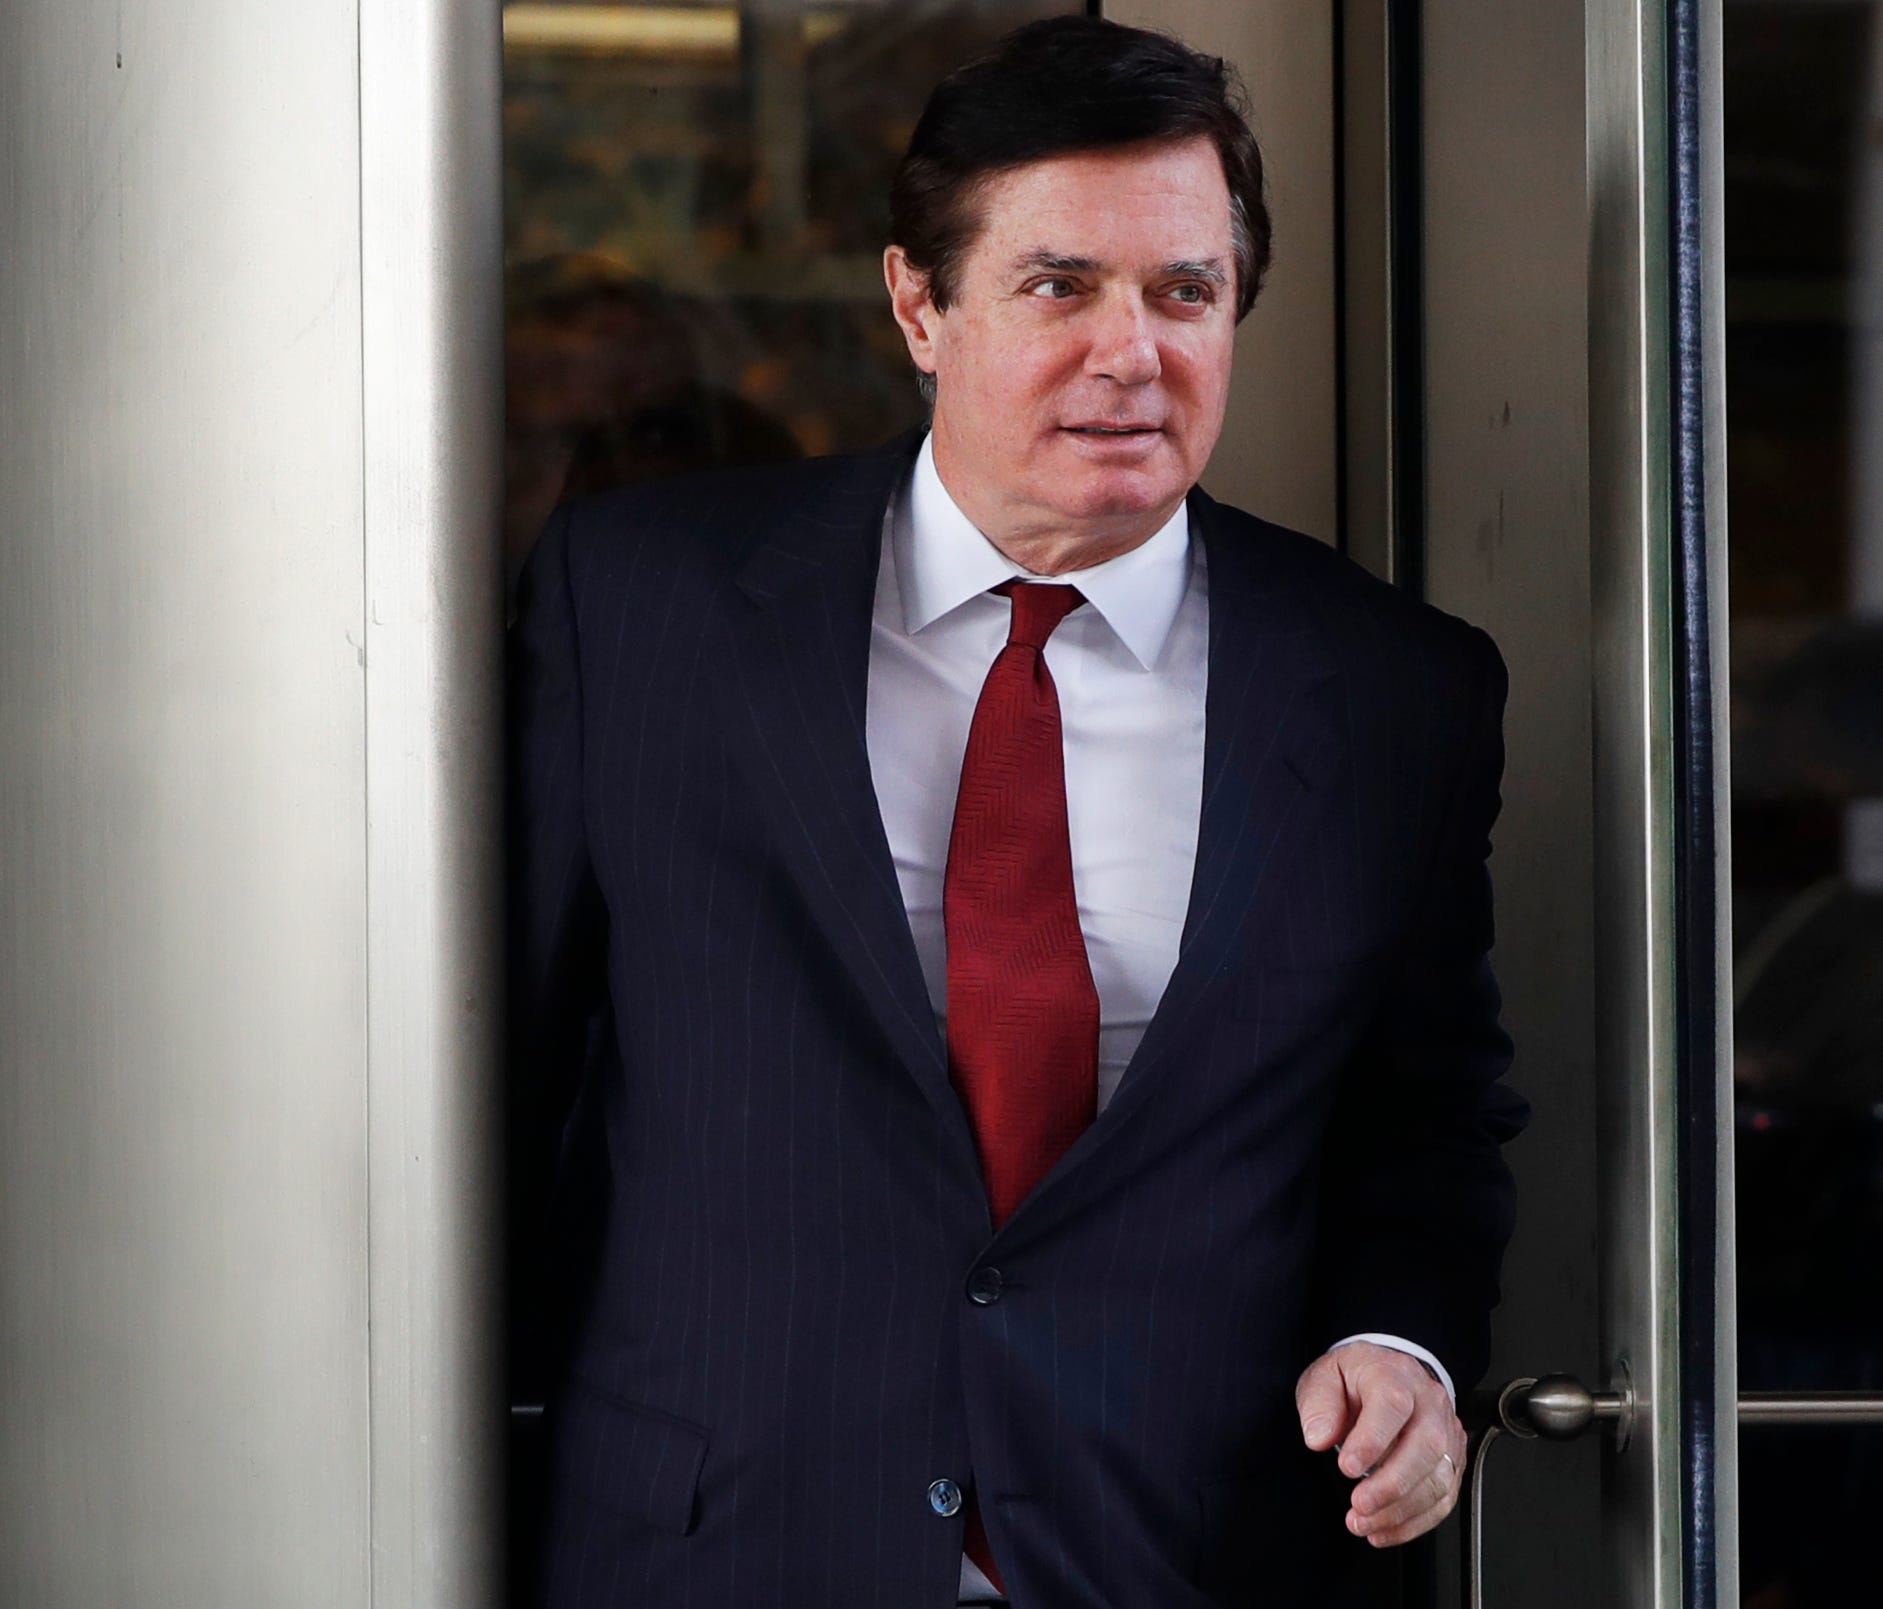 Manafort leaves a federal courthouse.